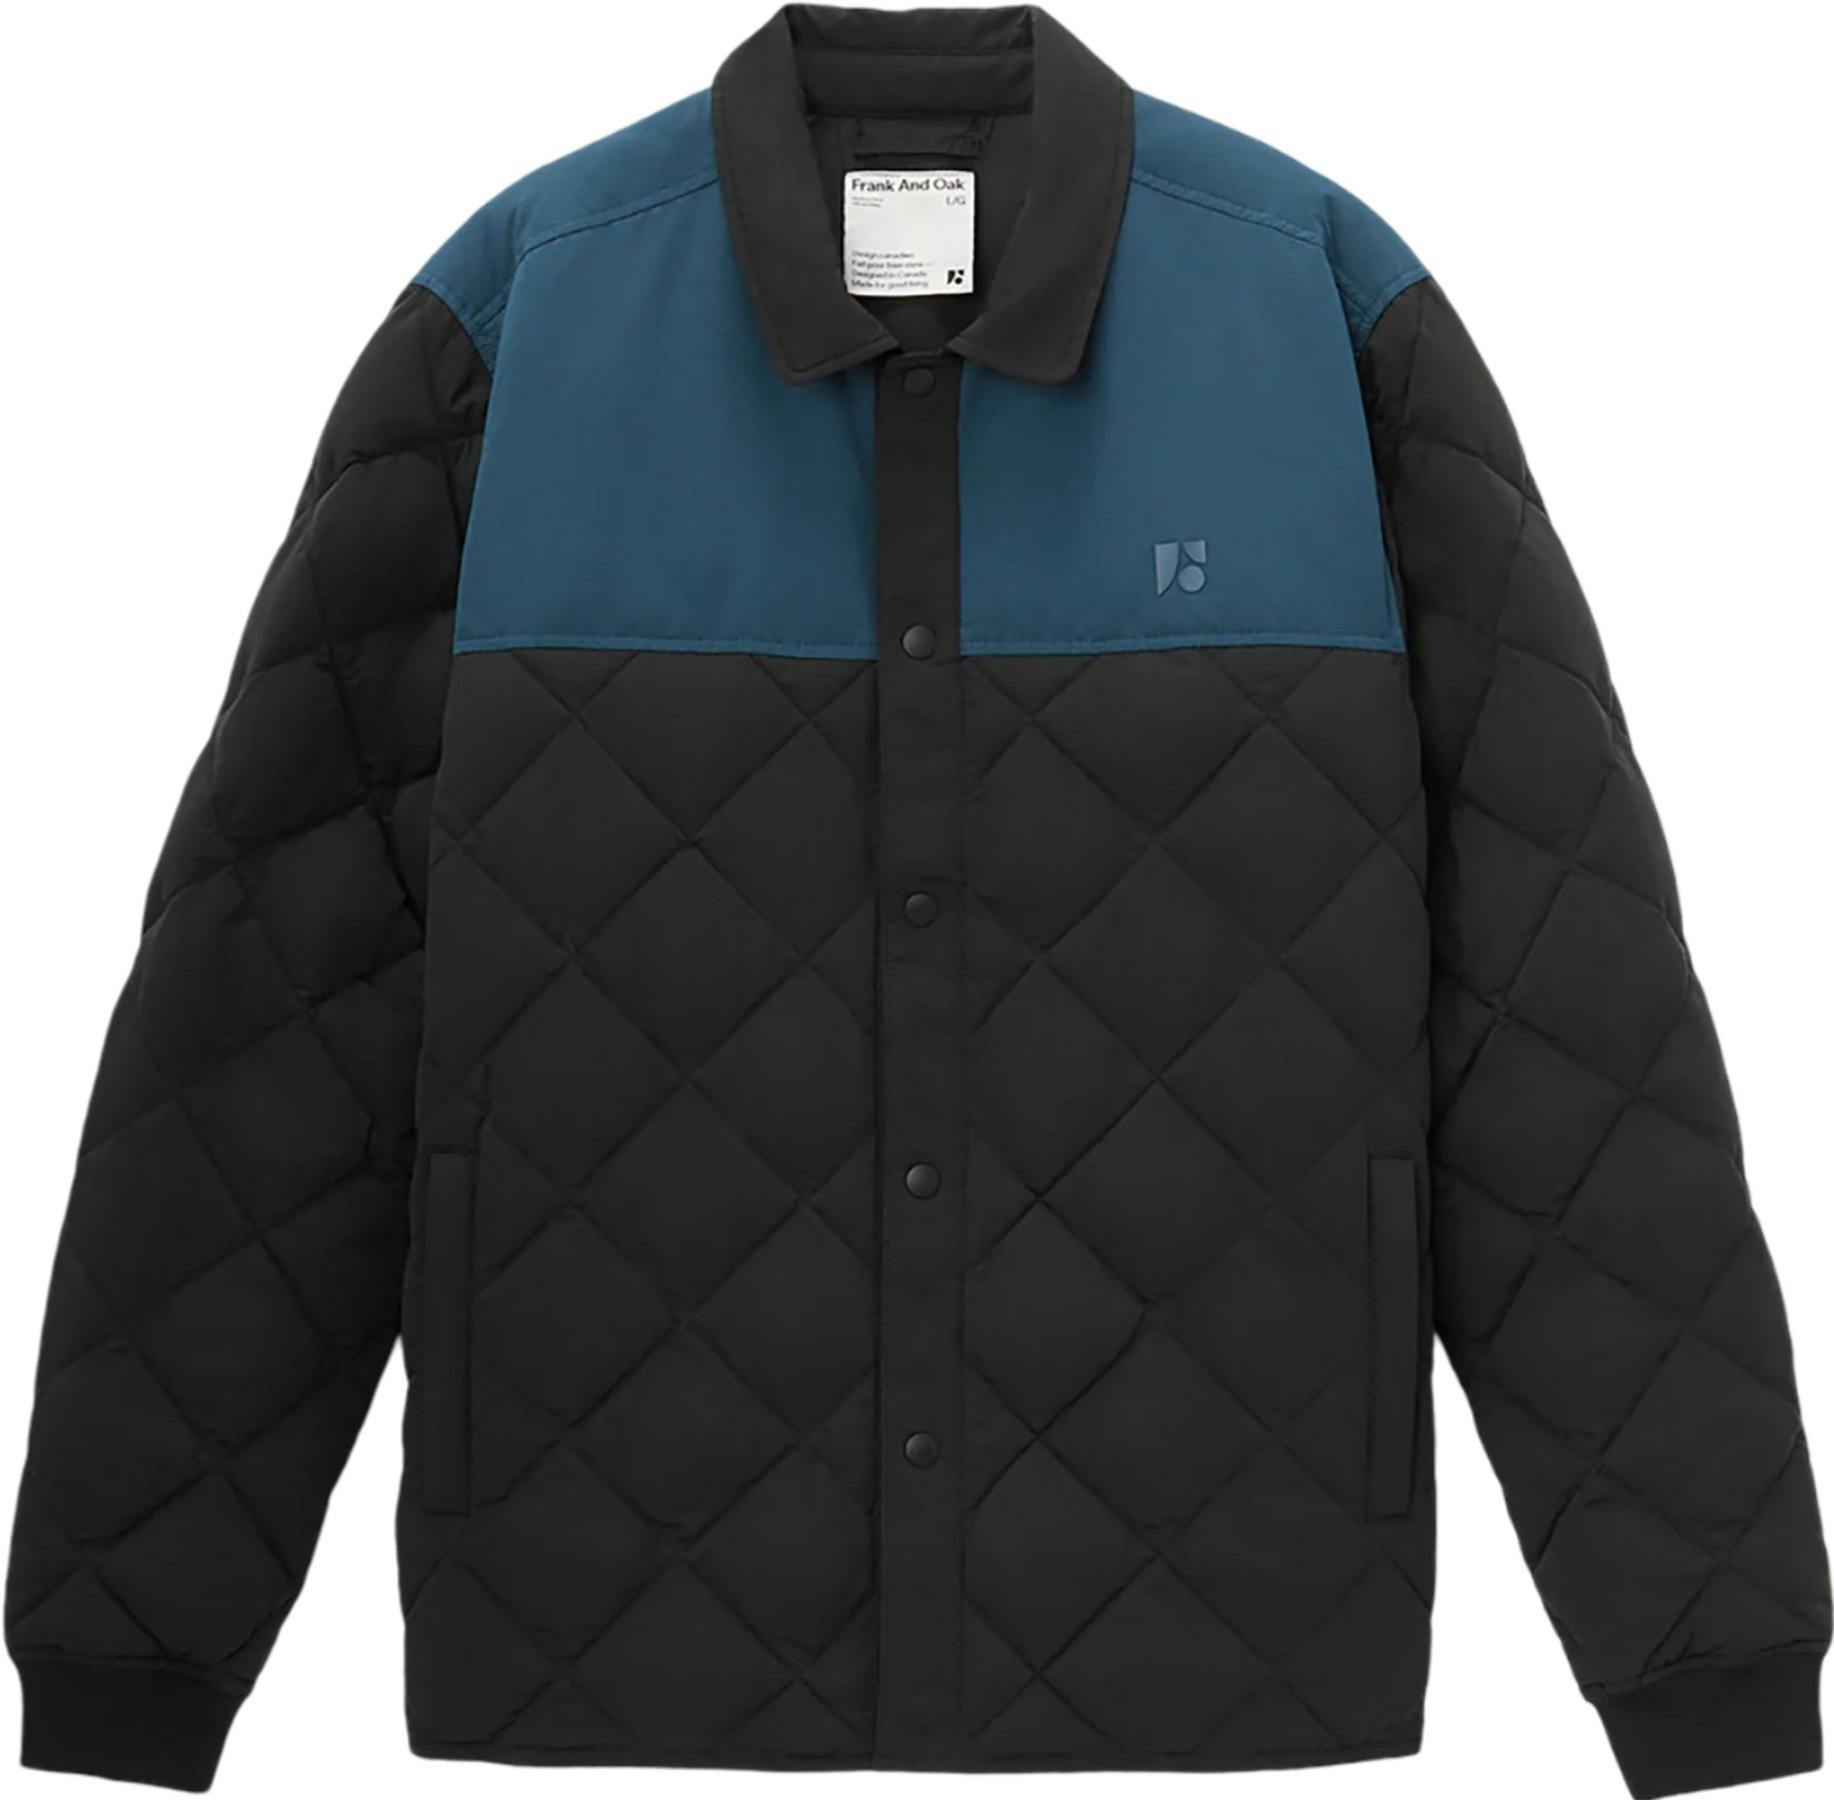 Product image for Skyline Collared Jacket - Men's